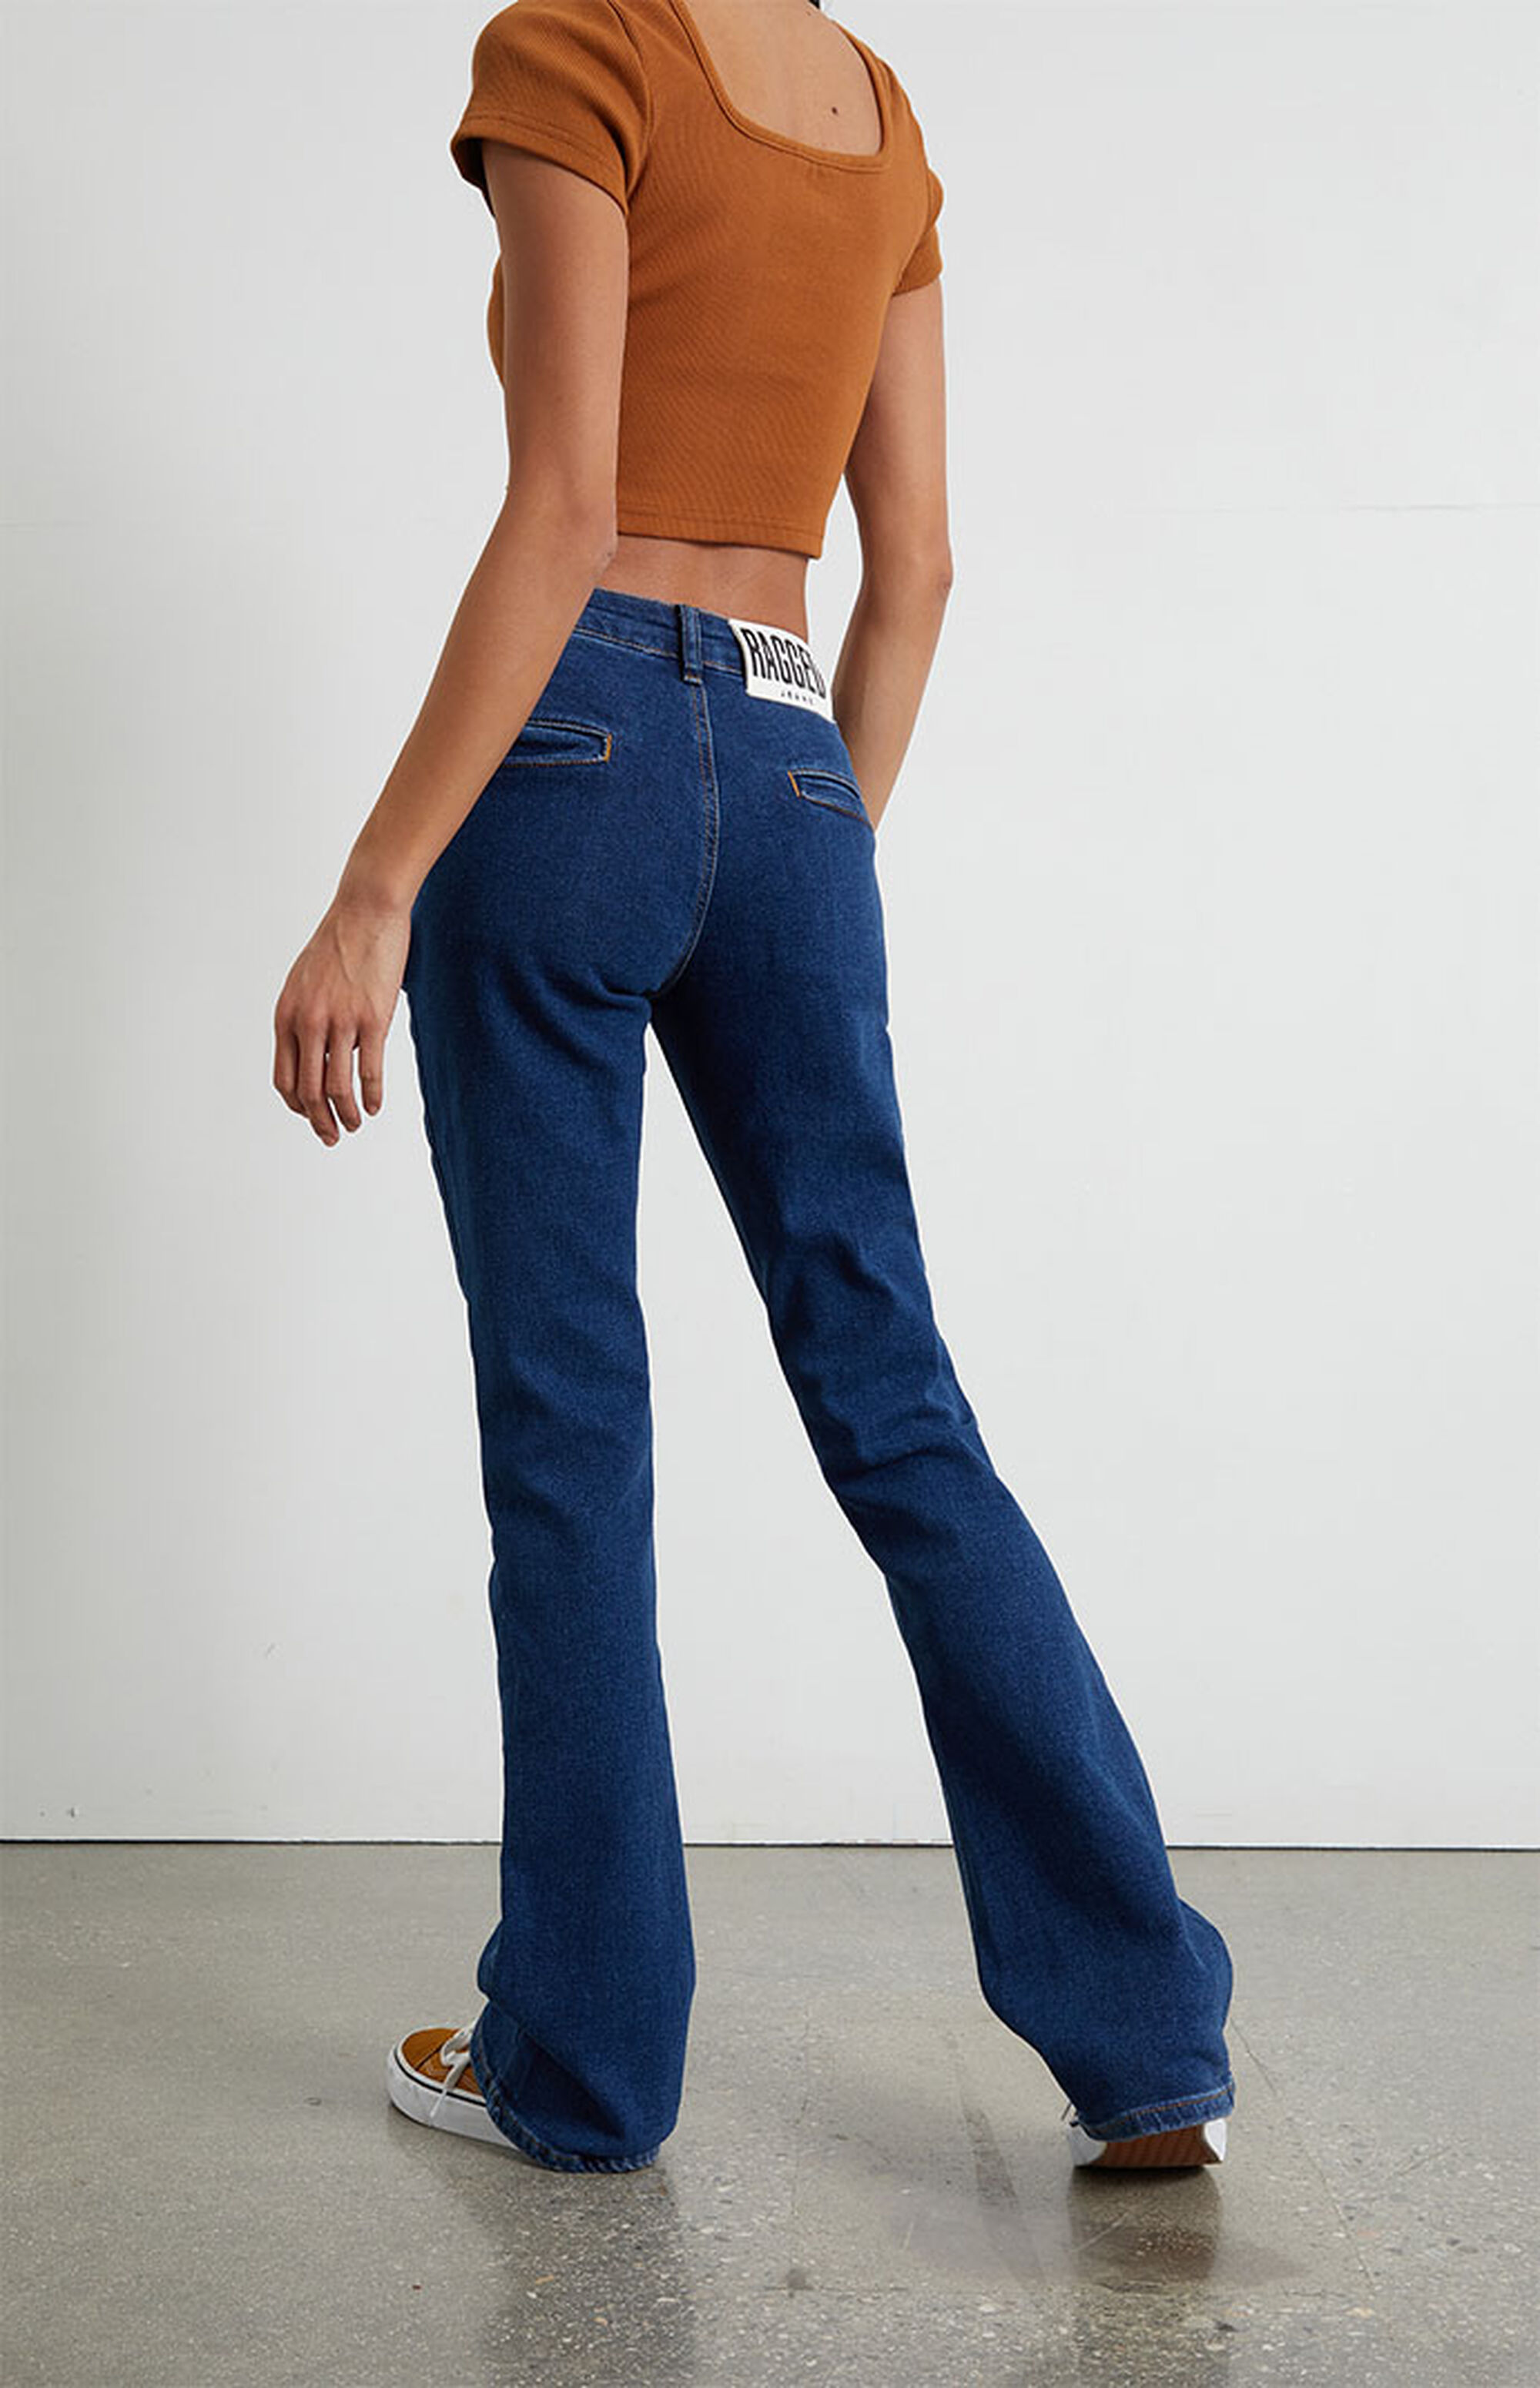 Ragged Jeans Flashback Low Rider Flare Jeans | PacSun